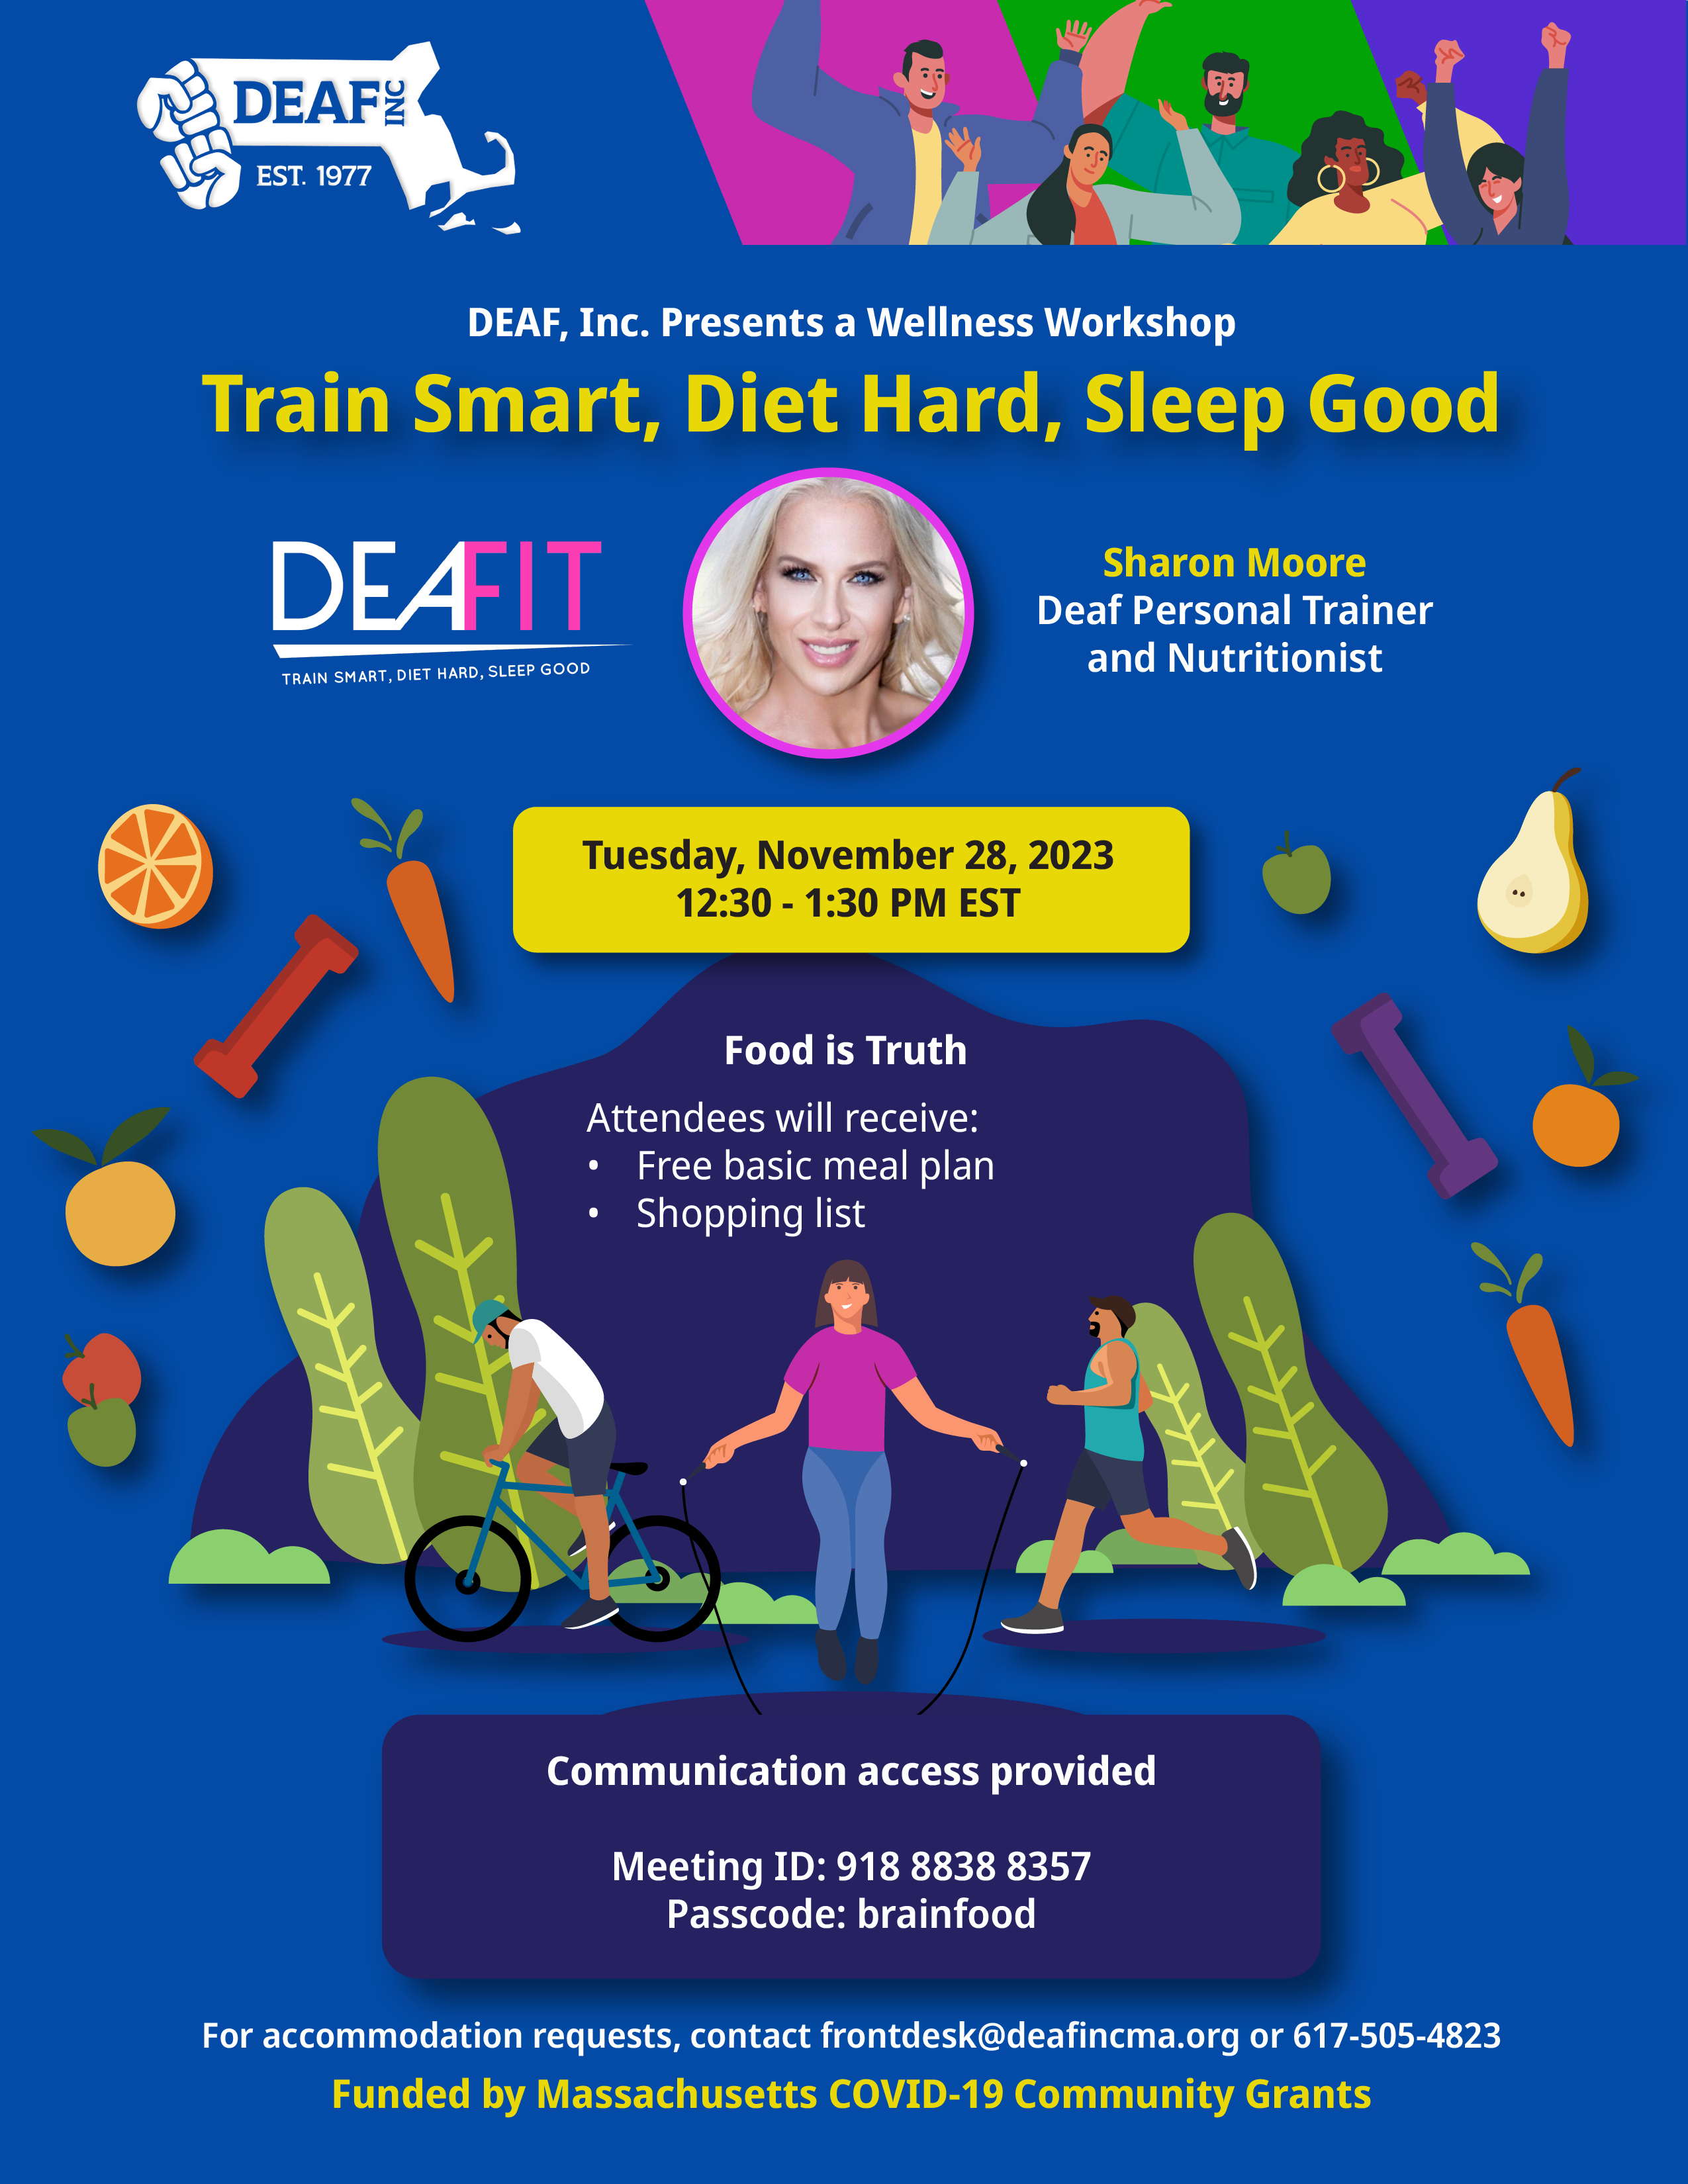 A dark blue background flyer with the center focused on 3 people doing different types of exercises surrounded by healthy foods and dumbbells. The information reads, “DEAF, Inc. Presents a Wellness Workshop Train Smart, Diet Hard, Sleep Good, Sharon Moore Deaf Personal Trainer and Nutritionist, Tuesday, November 28, 2023 12:30 - 1:30 PM EST Food is Truth, Attendees will receive: • Free basic meal plan •Shopping list Communication access provided Meeting ID: 918 8838 8357 Passcode: brainfood For accommodation requests, contact frontdesk@deafincma.org or 617-505-4823 Funded by Massachusetts COVID-19 Community Grants.” The following logos are on the flyer for DEAF, Inc. and DEAFIT. At the top right there is an image of a diverse group of people pumping their fists in the air.